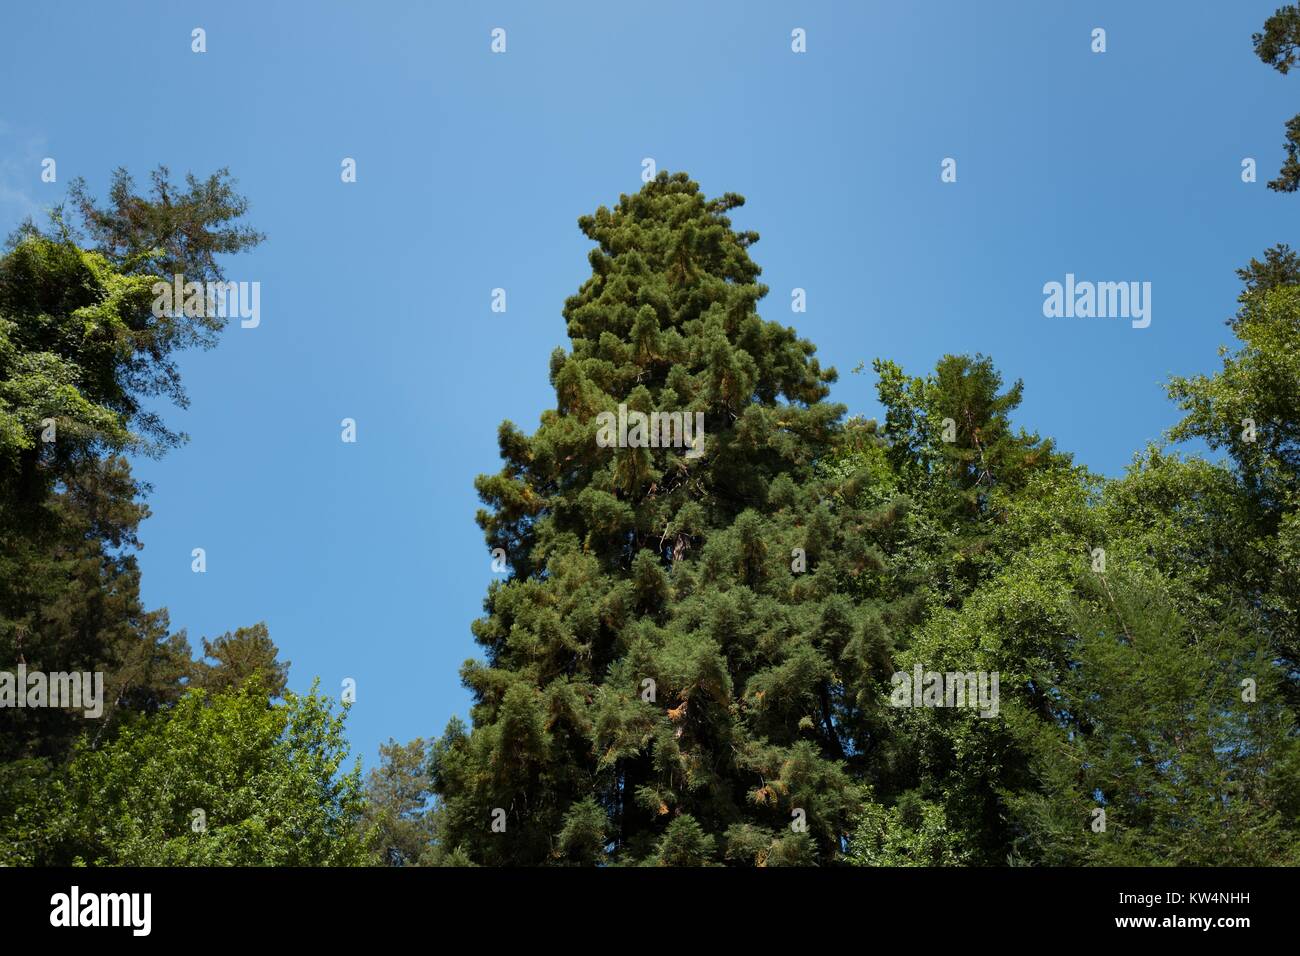 A mix of evergreen and deciduous trees as seen against the sky at Muir Woods National Monument, Mill Valley, California, September 5, 2016. Stock Photo